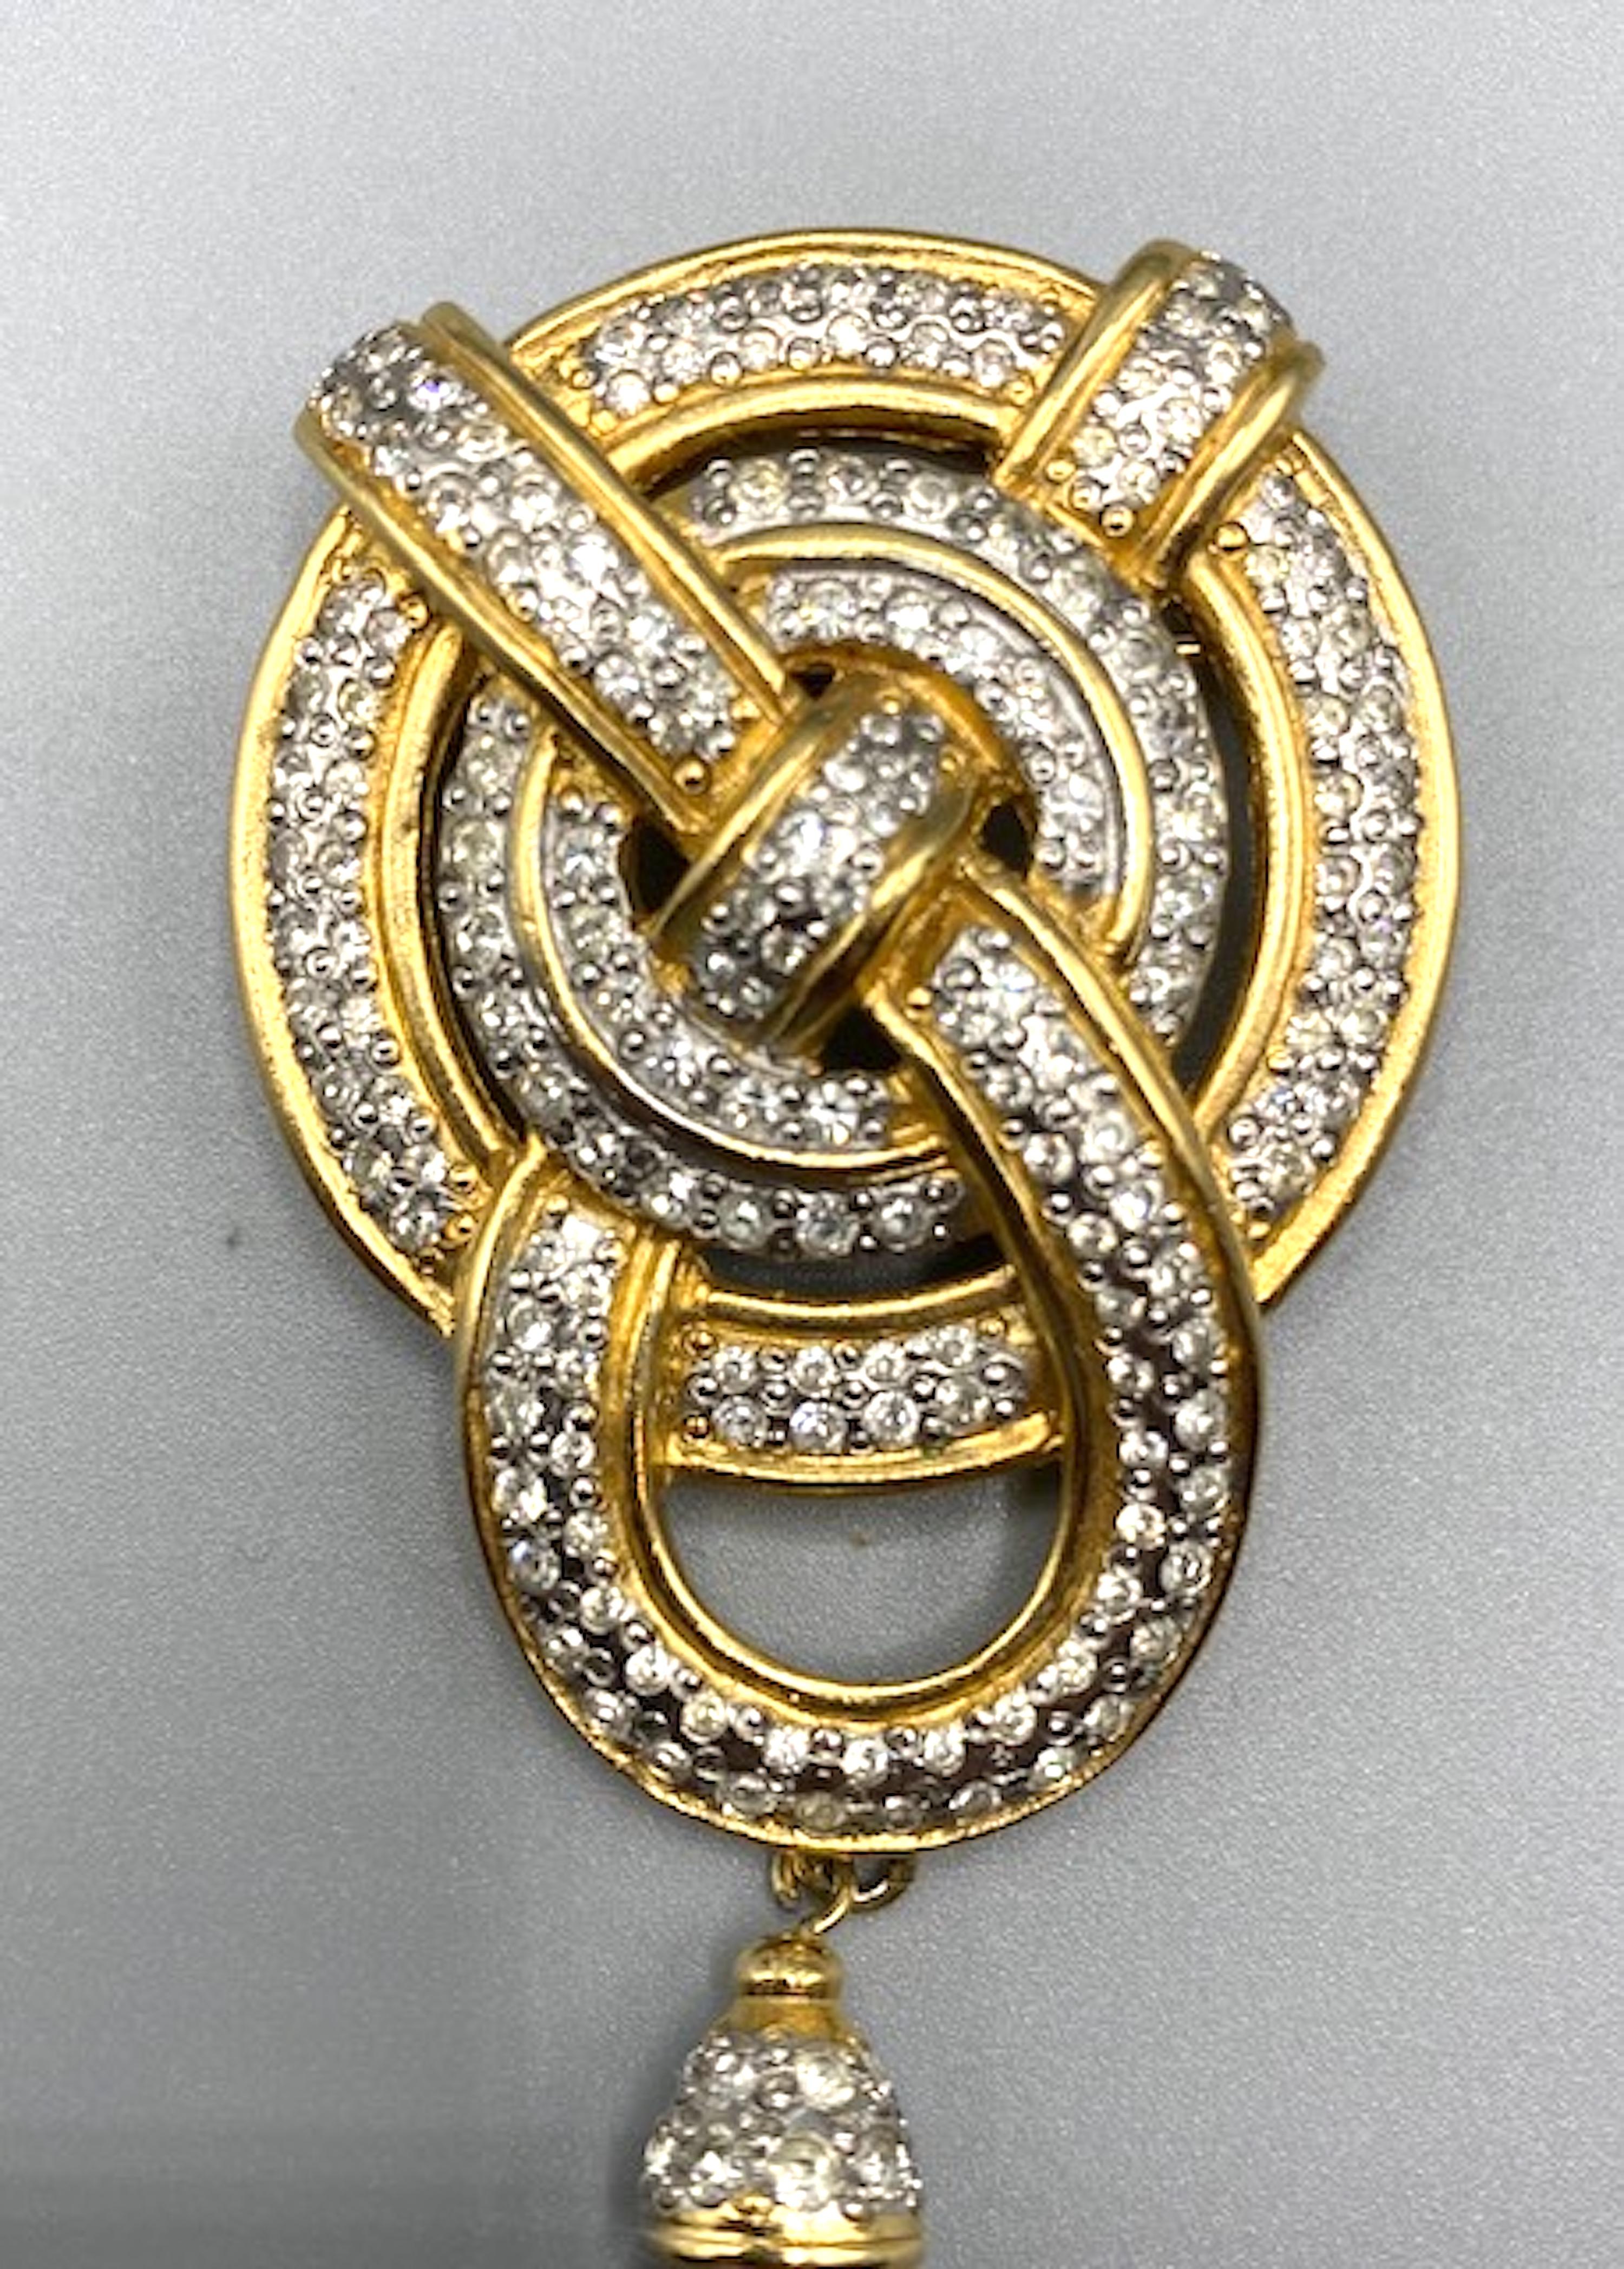 Exquisite  and elegant Valentino Garavani made in Italy golden geometric brooch, with golden intertwined circles with rhinestones and black glass pearl pendant.
measures 3.5 in by 1.5/8